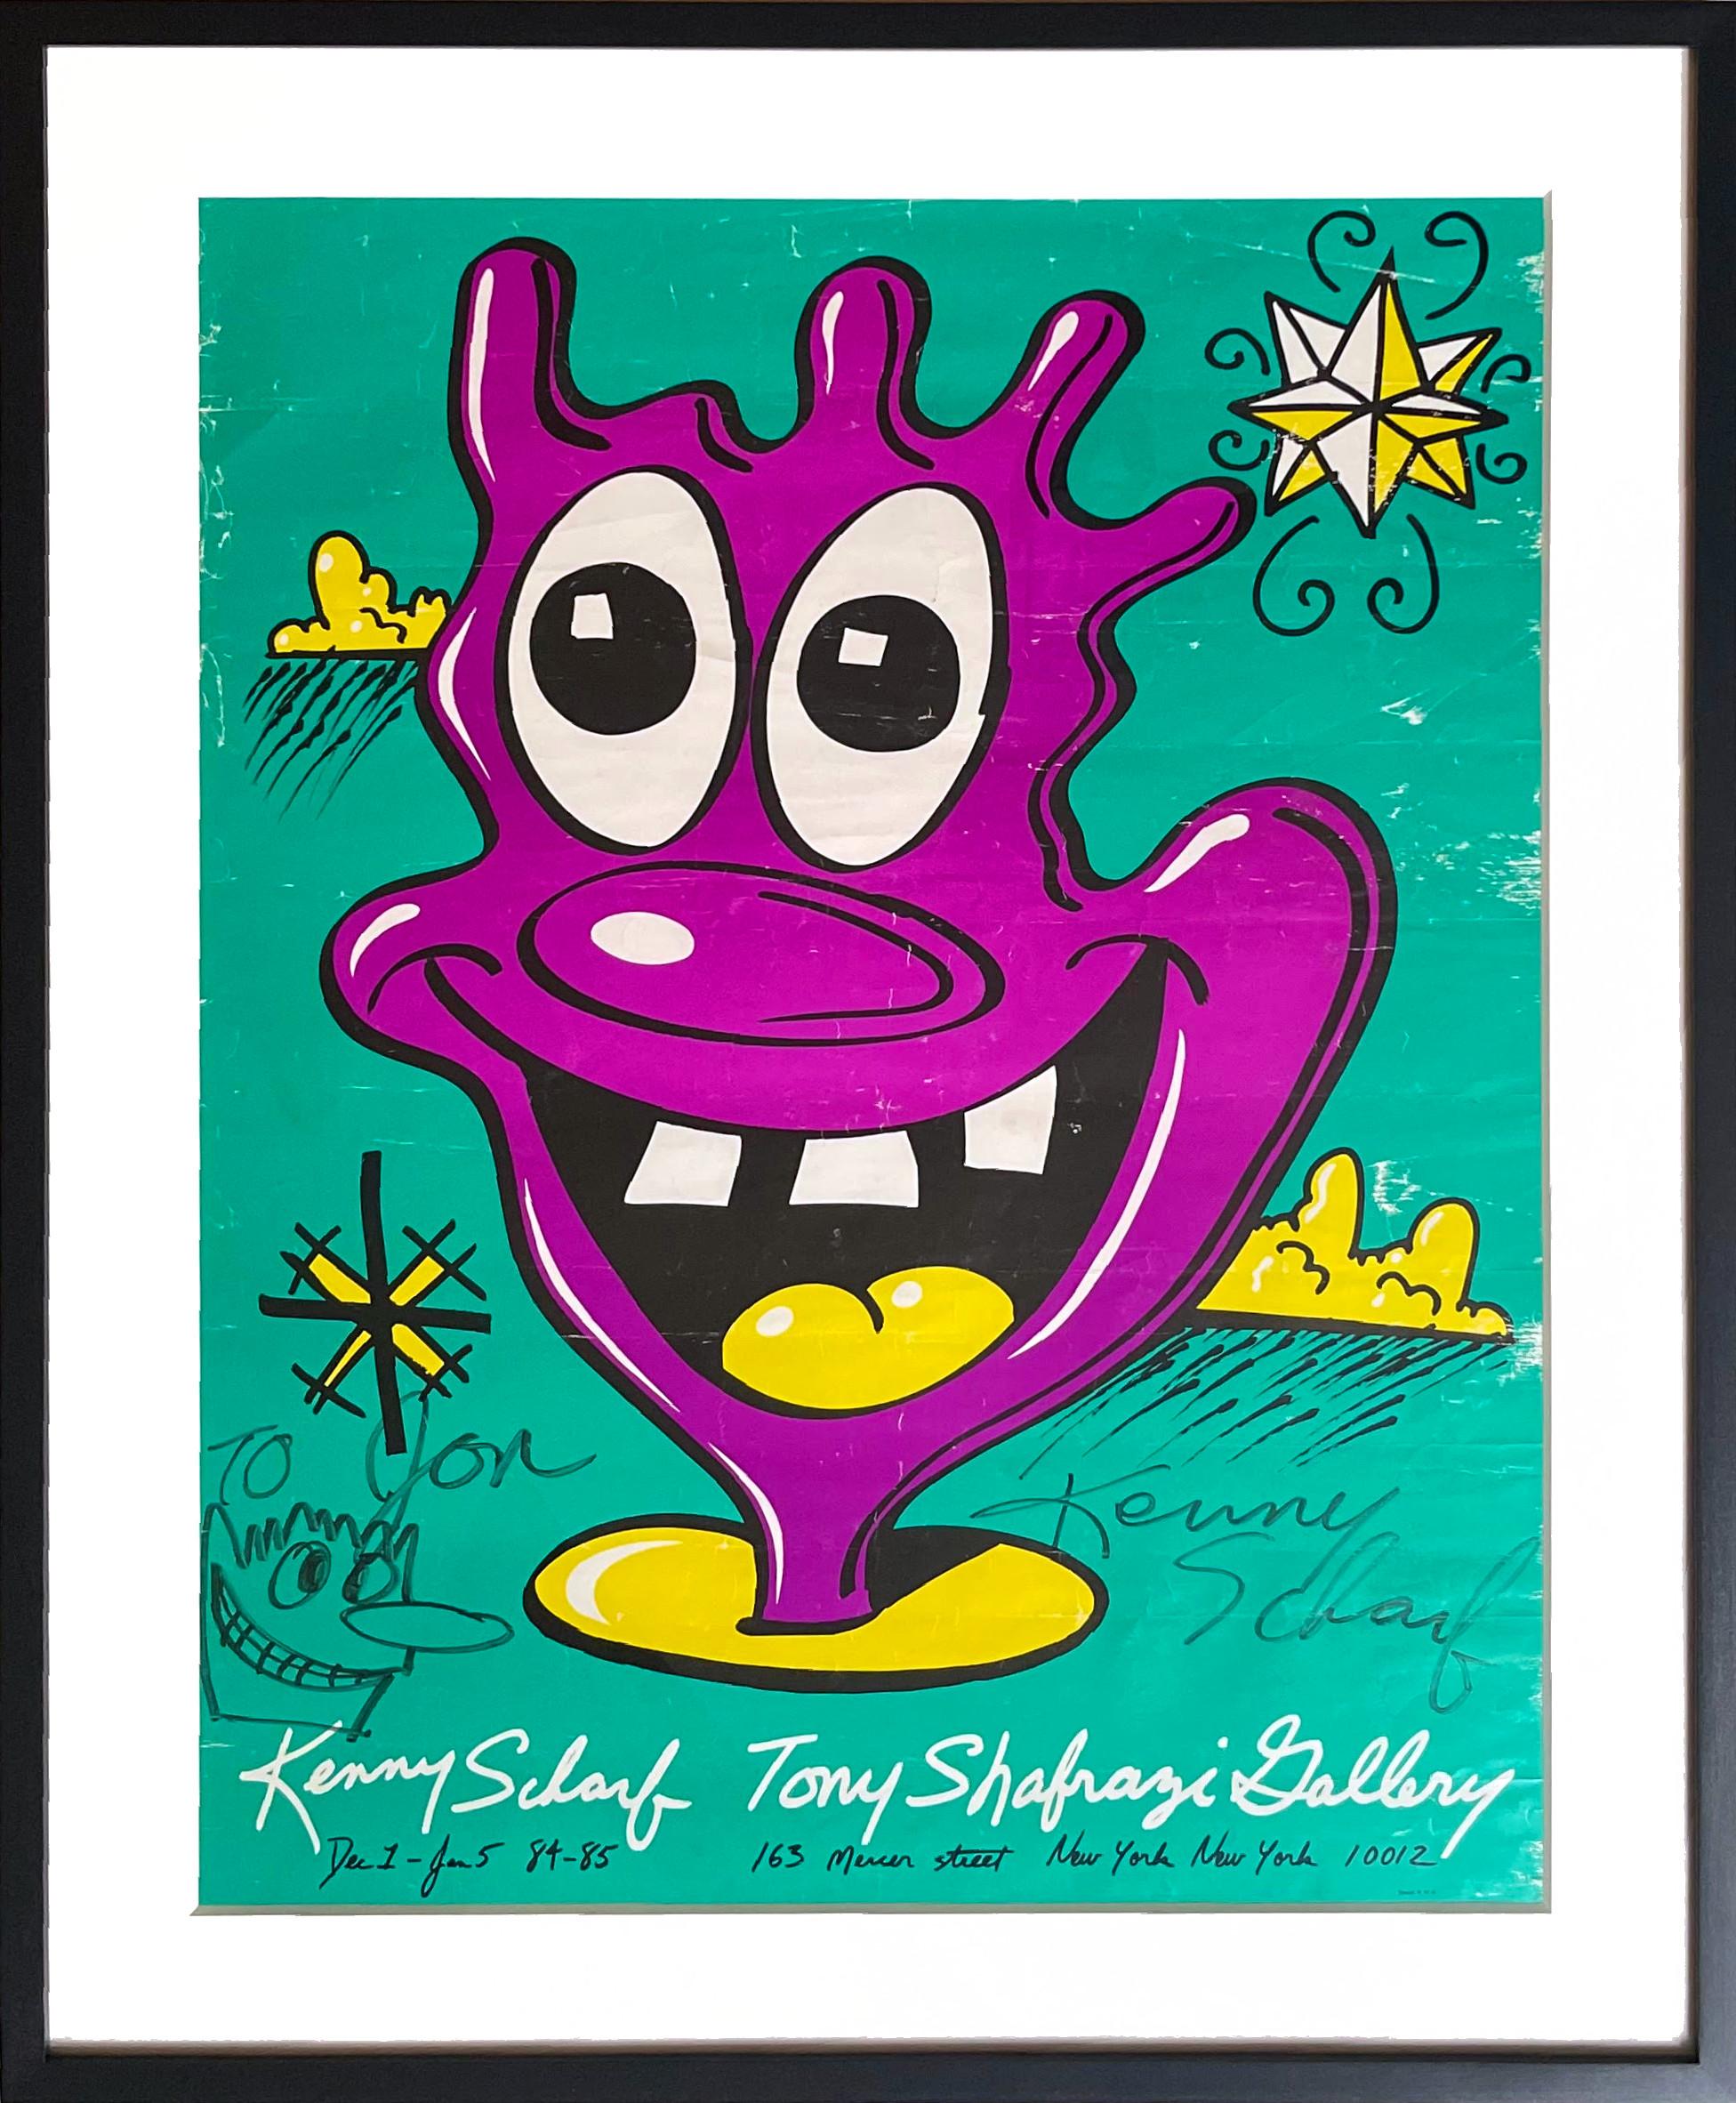 Unique drawing on Tony Shafrazi poster, signed & inscribed to Warhol's boyfriend